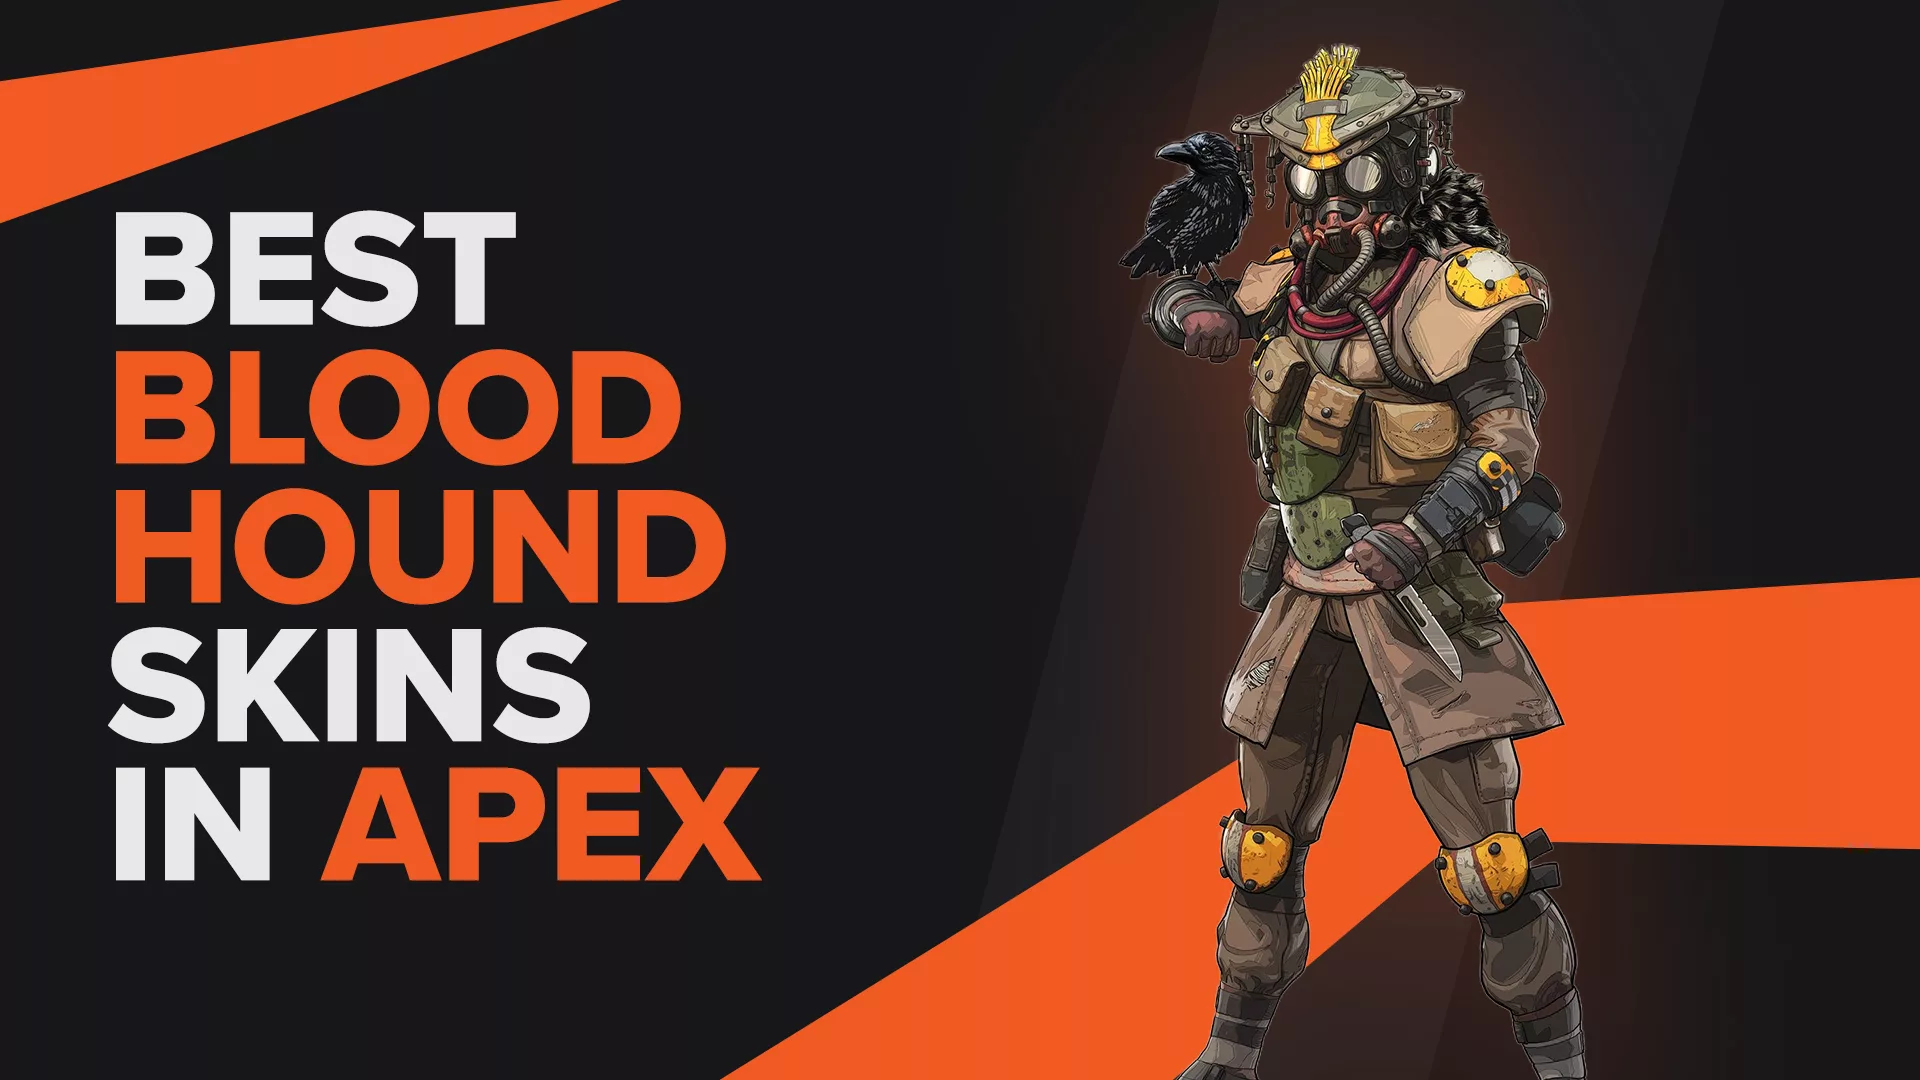 The Best Bloodhound Skins in Apex Legends that will make You stand out